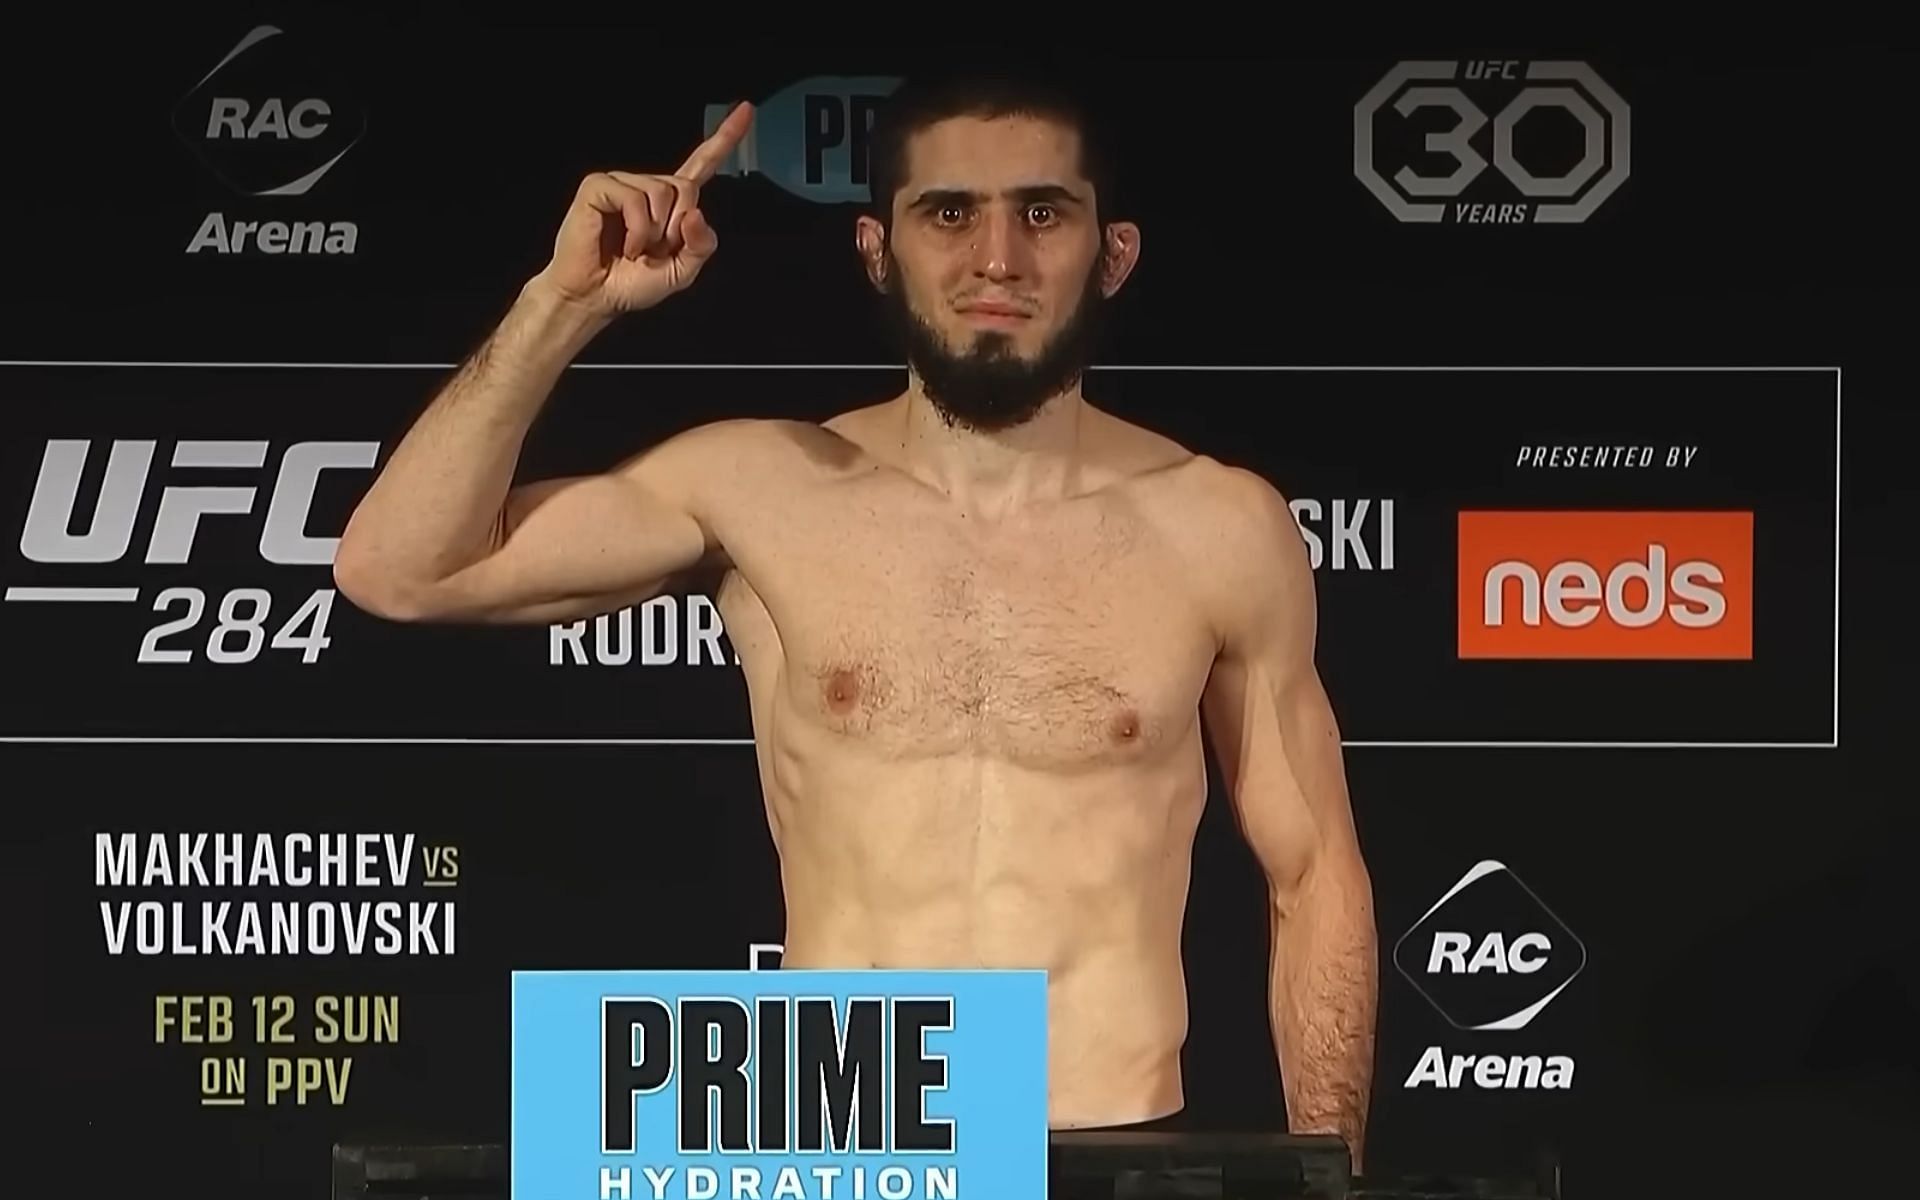 UFC lightweight champion Islam Makhachev tearing up after making weight at UFC 284 [Image courtesy: @ufc on YouTube]